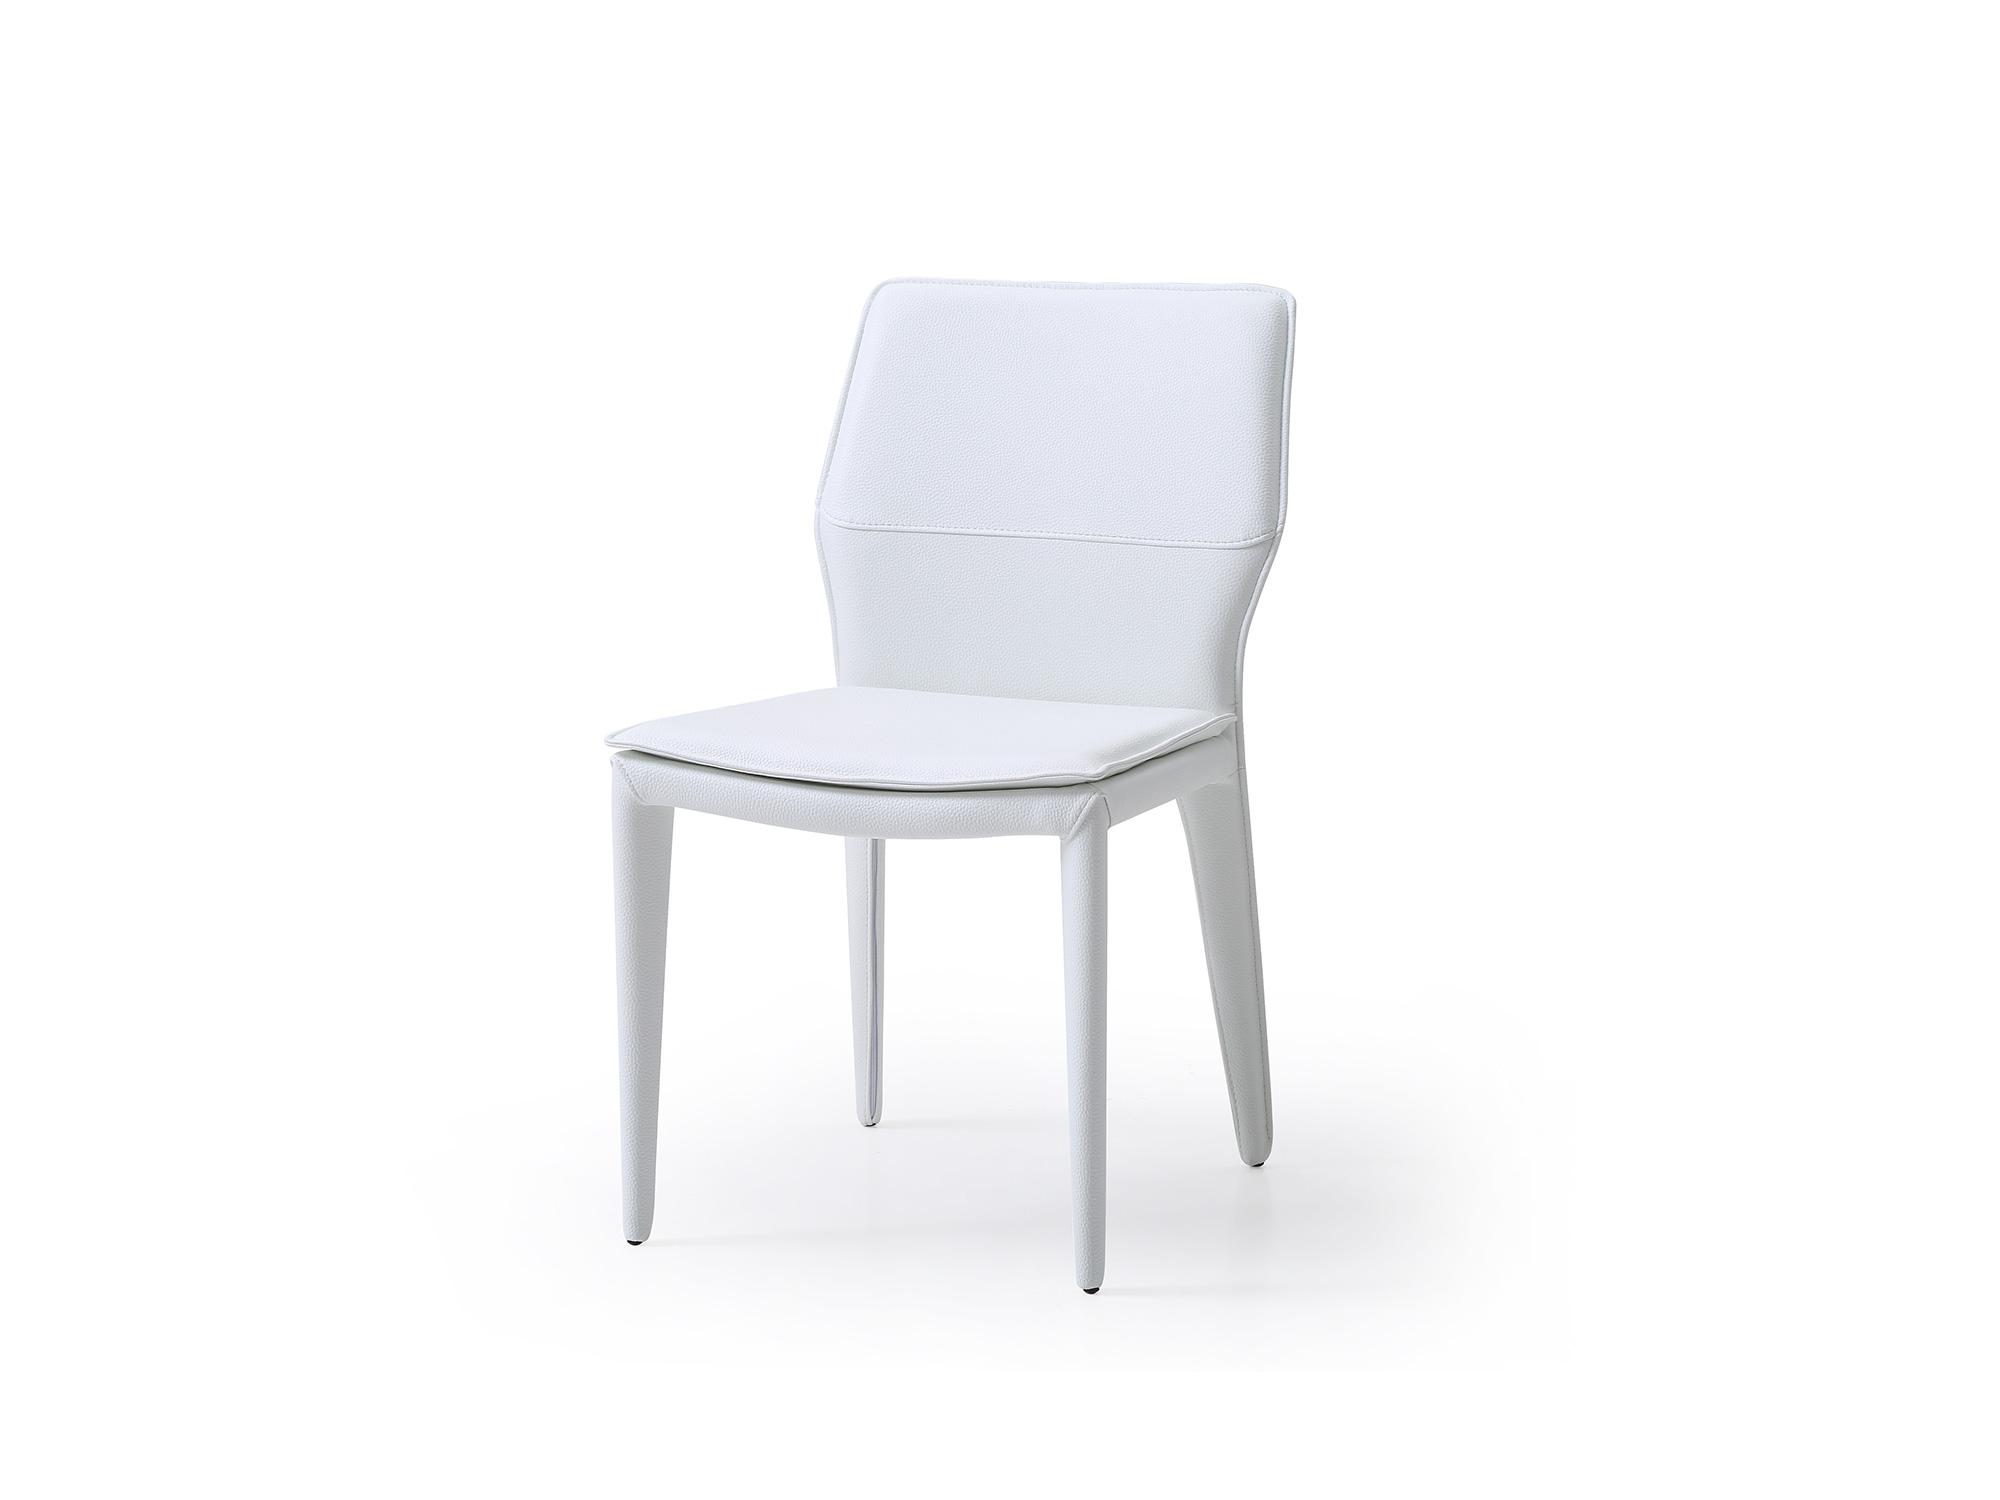 Modern Dining Chair Set DC1475-WHT Miranda DC1475-WHT in White Faux Leather